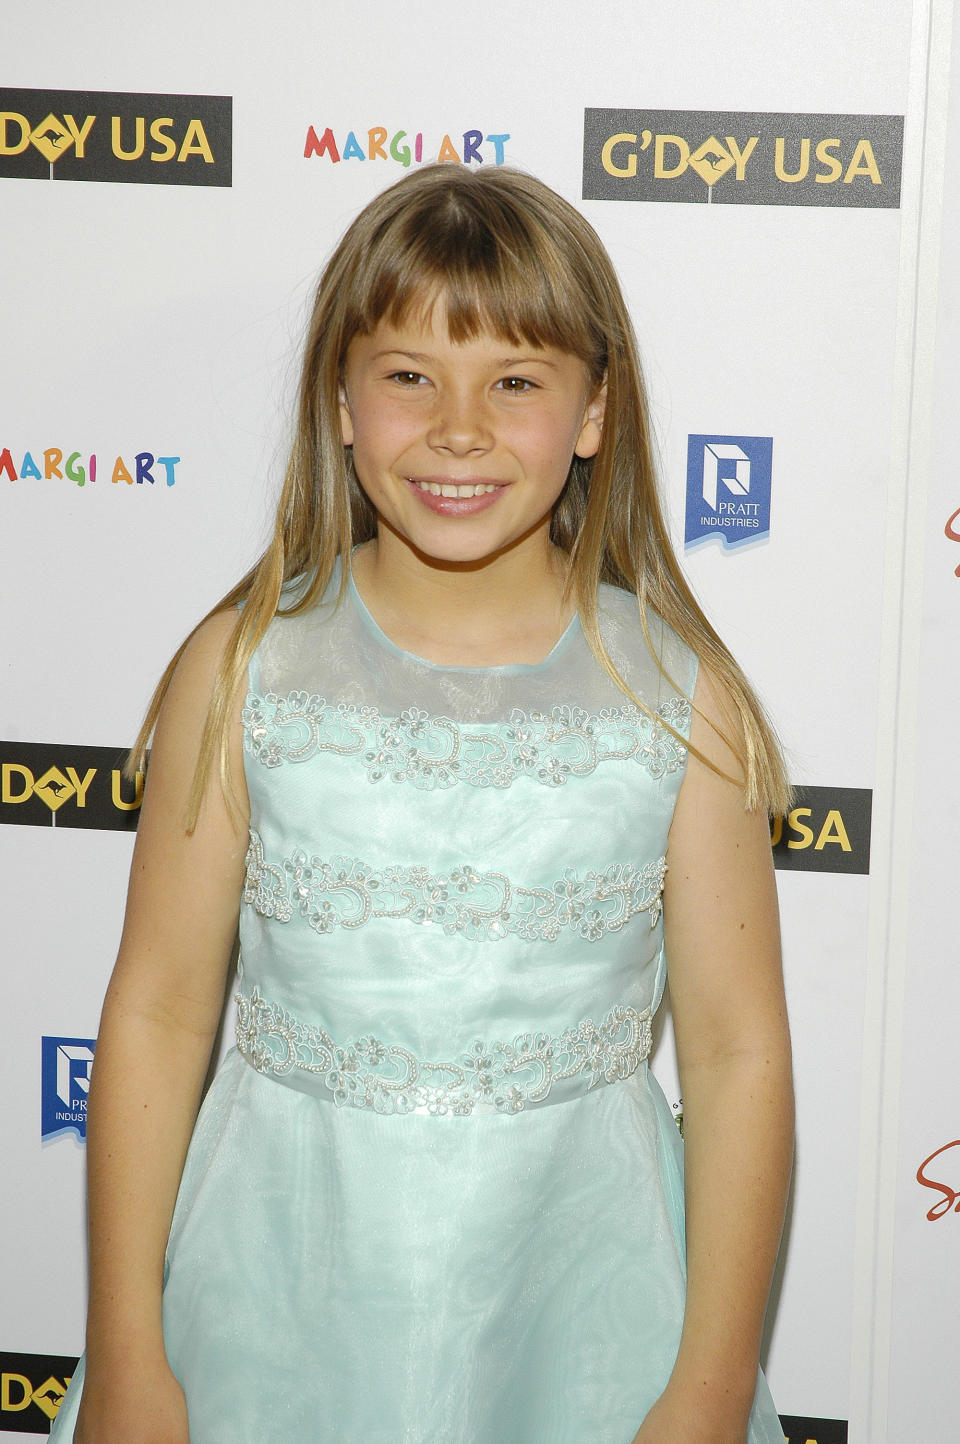 TV personality Bindi Irwin poses at the opening night celebration for G'DAY USA: Australia Week at Jazz Lincoln Center on January 22, 2008 in New York City. (Photo by Steven Henry/Getty Images)